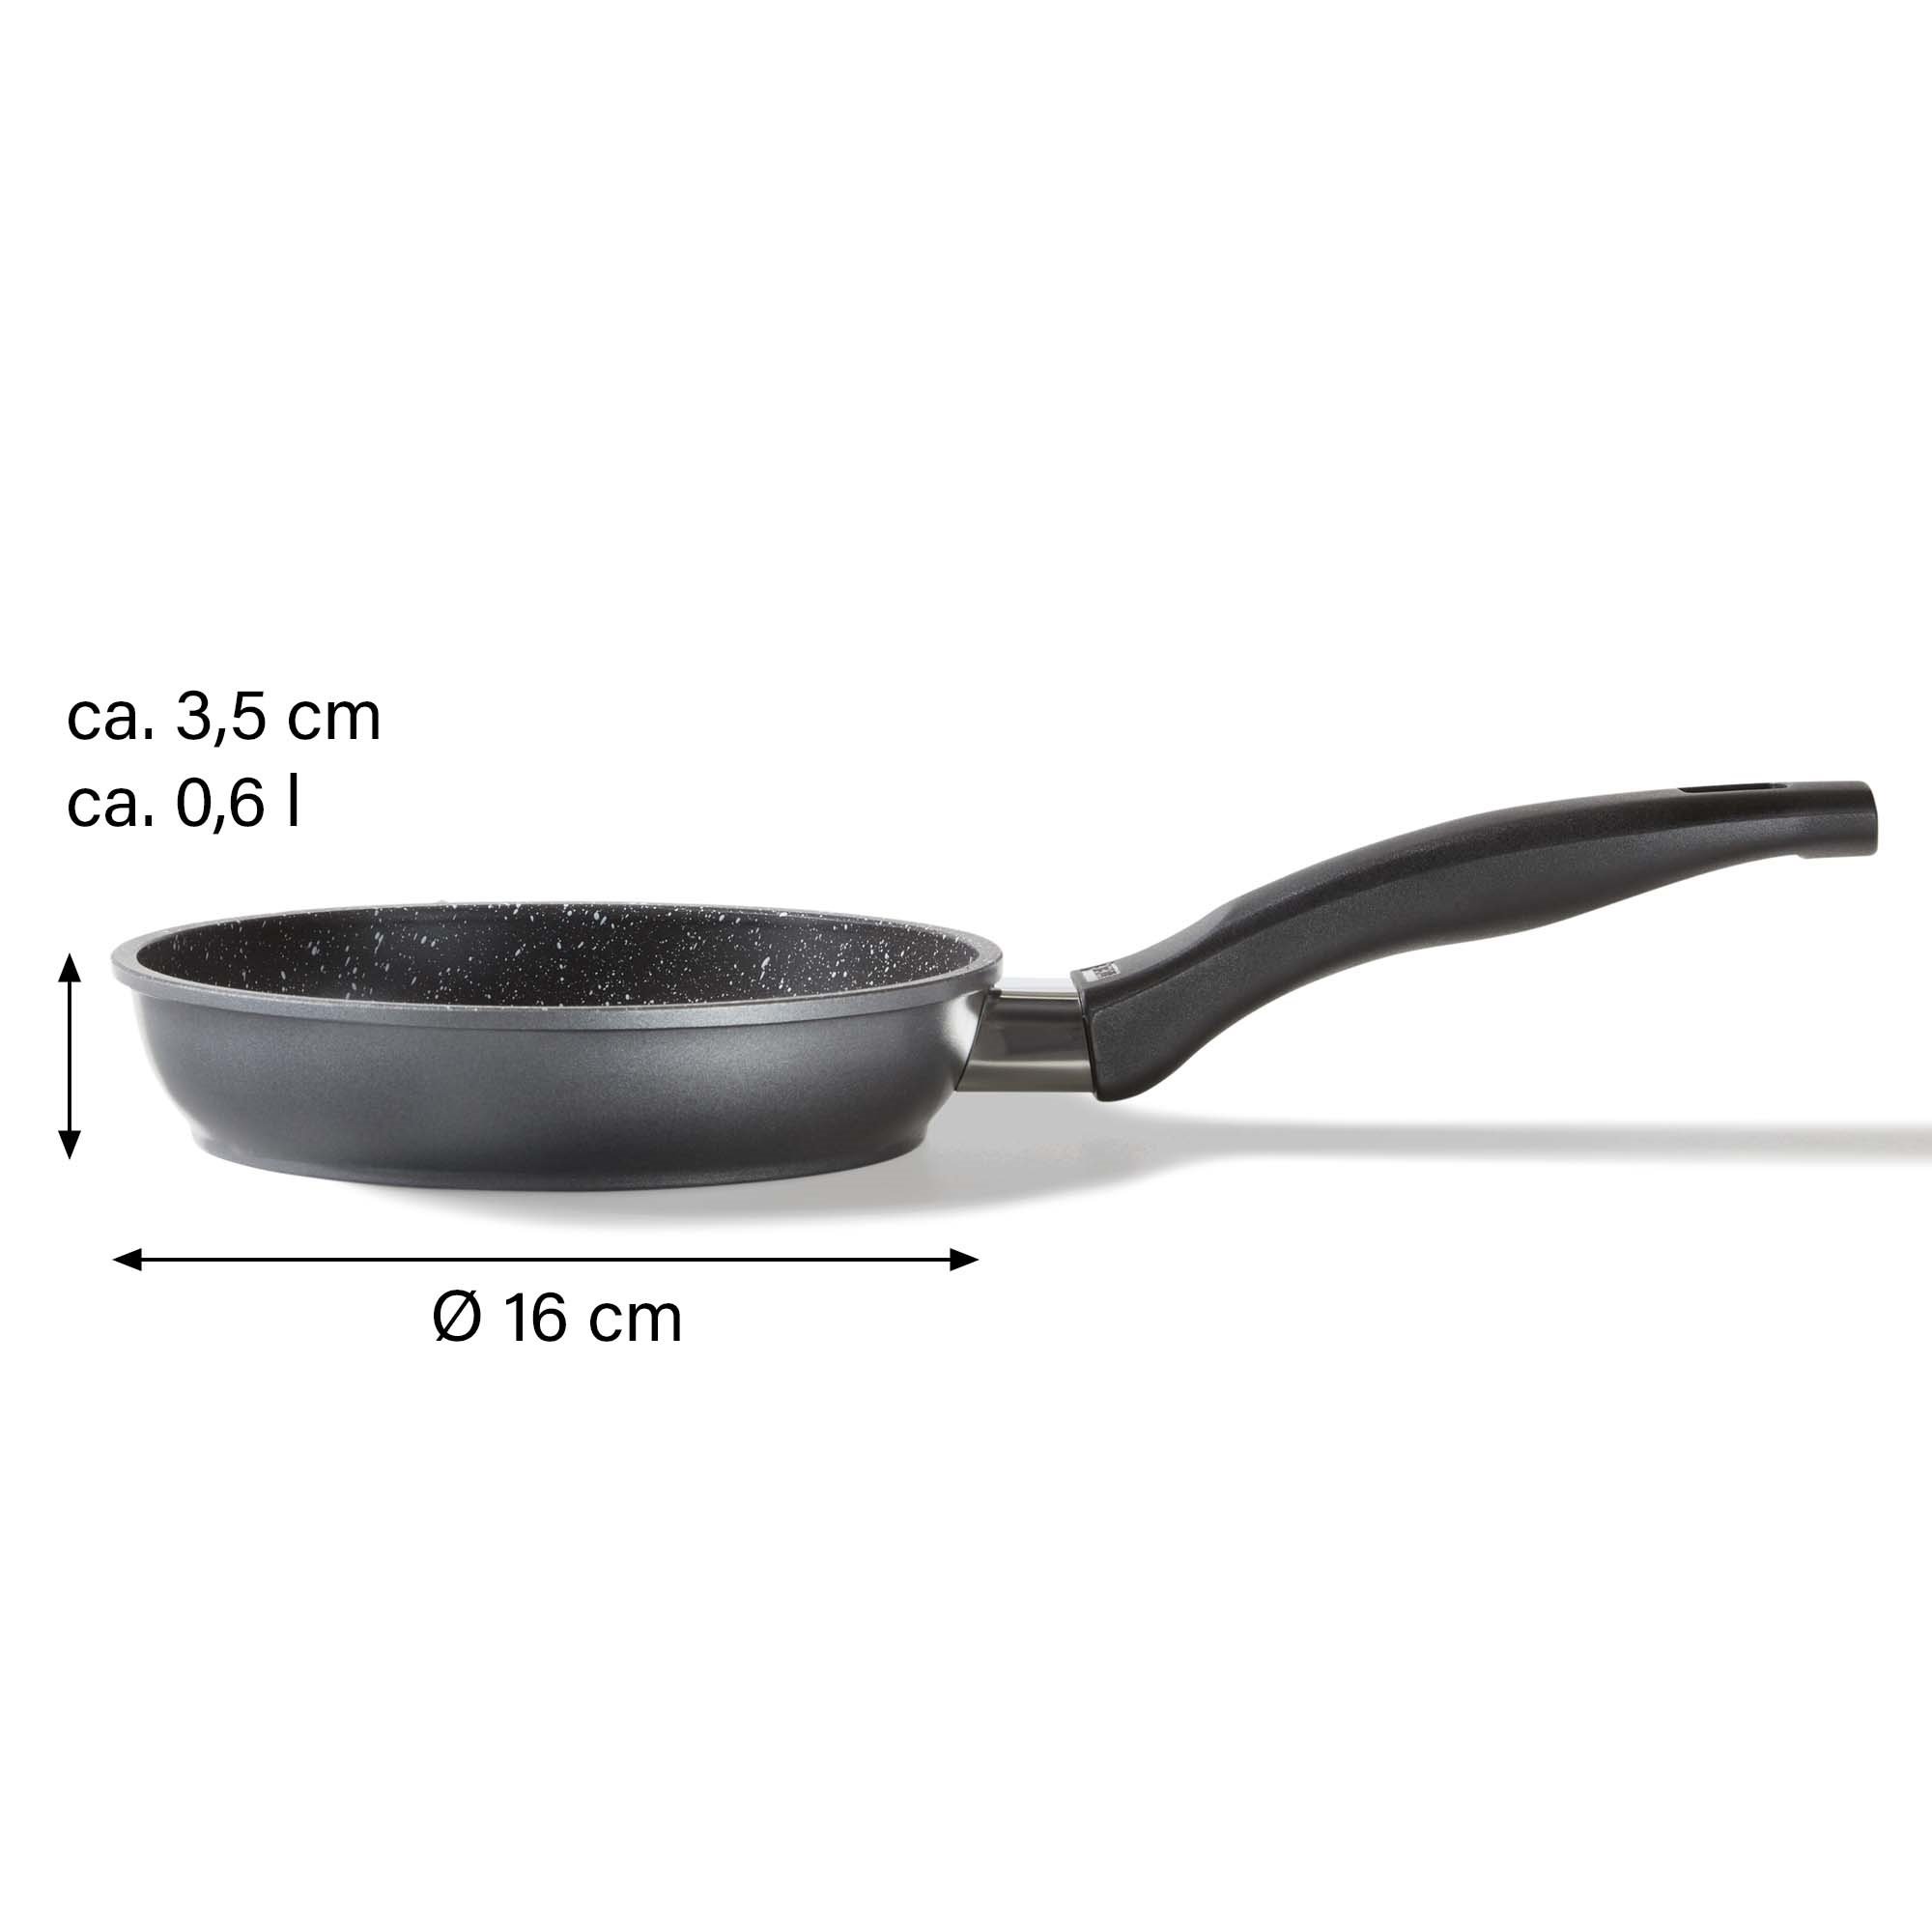 STONELINE® frying pan 16 cm, non-stick omelette pan, oven and induction suitable